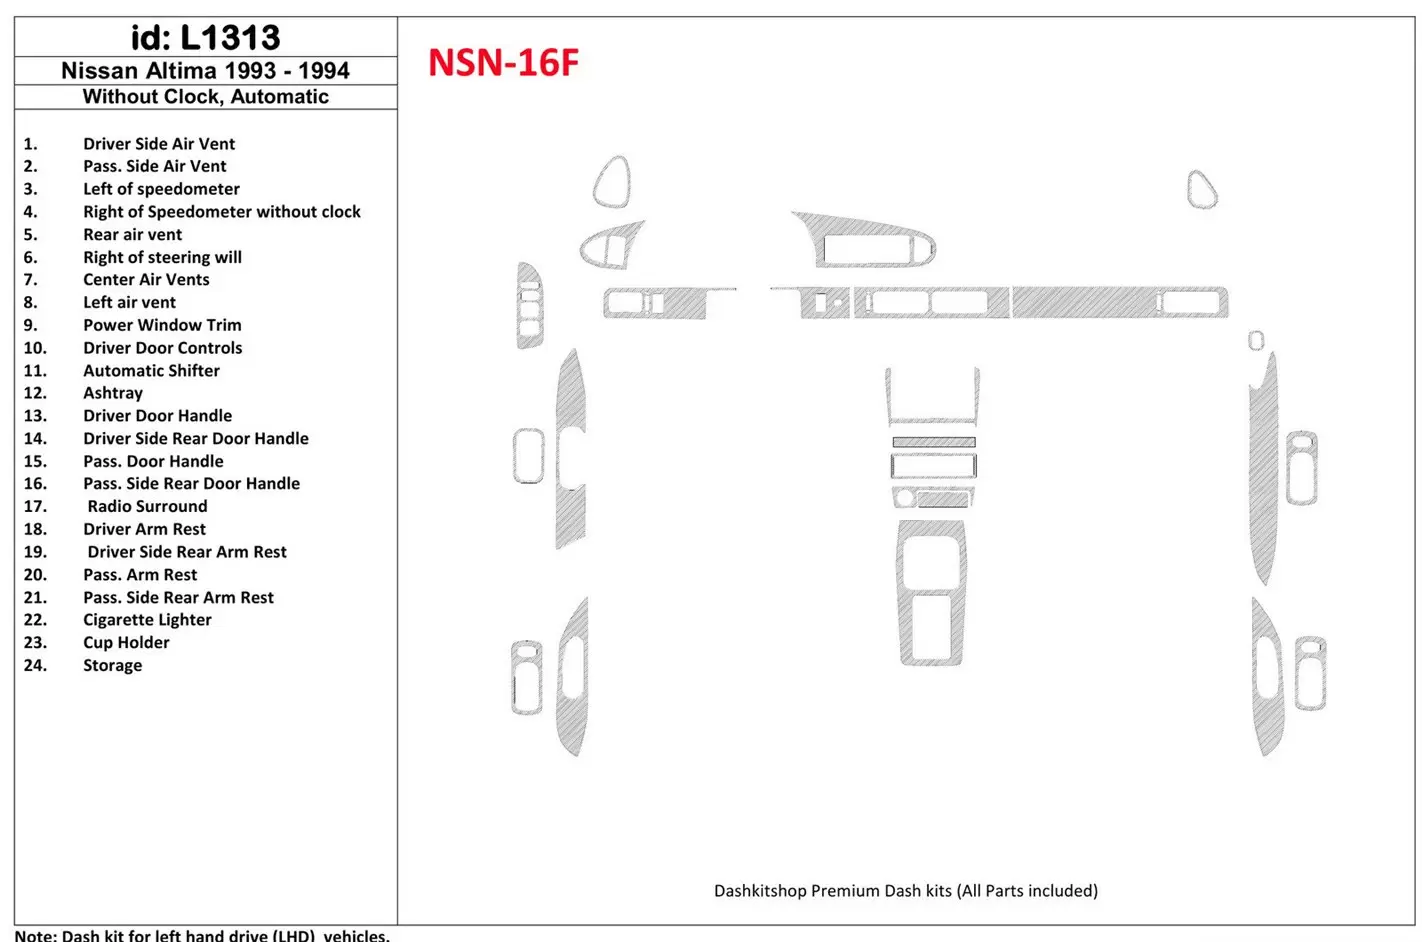 Nissan Altima 1993-1993 Automatic Gearbox, Without watches, Without OEM, 23 Parts set Cruscotto BD Rivestimenti interni